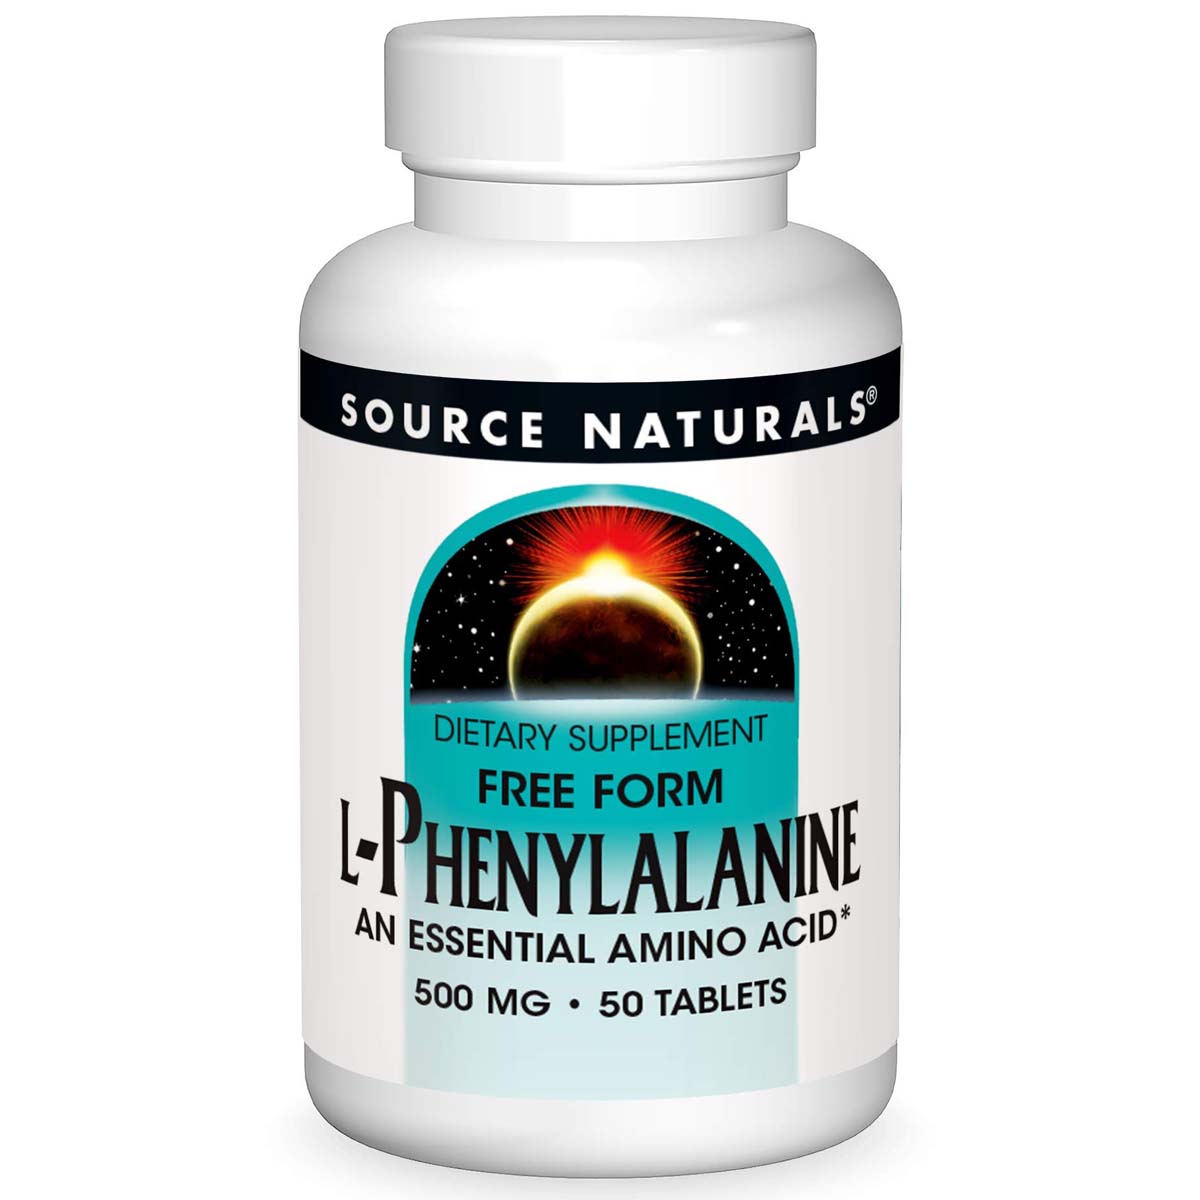 Source Naturals L Phenylalanine, 500 mg, 50 Tablets